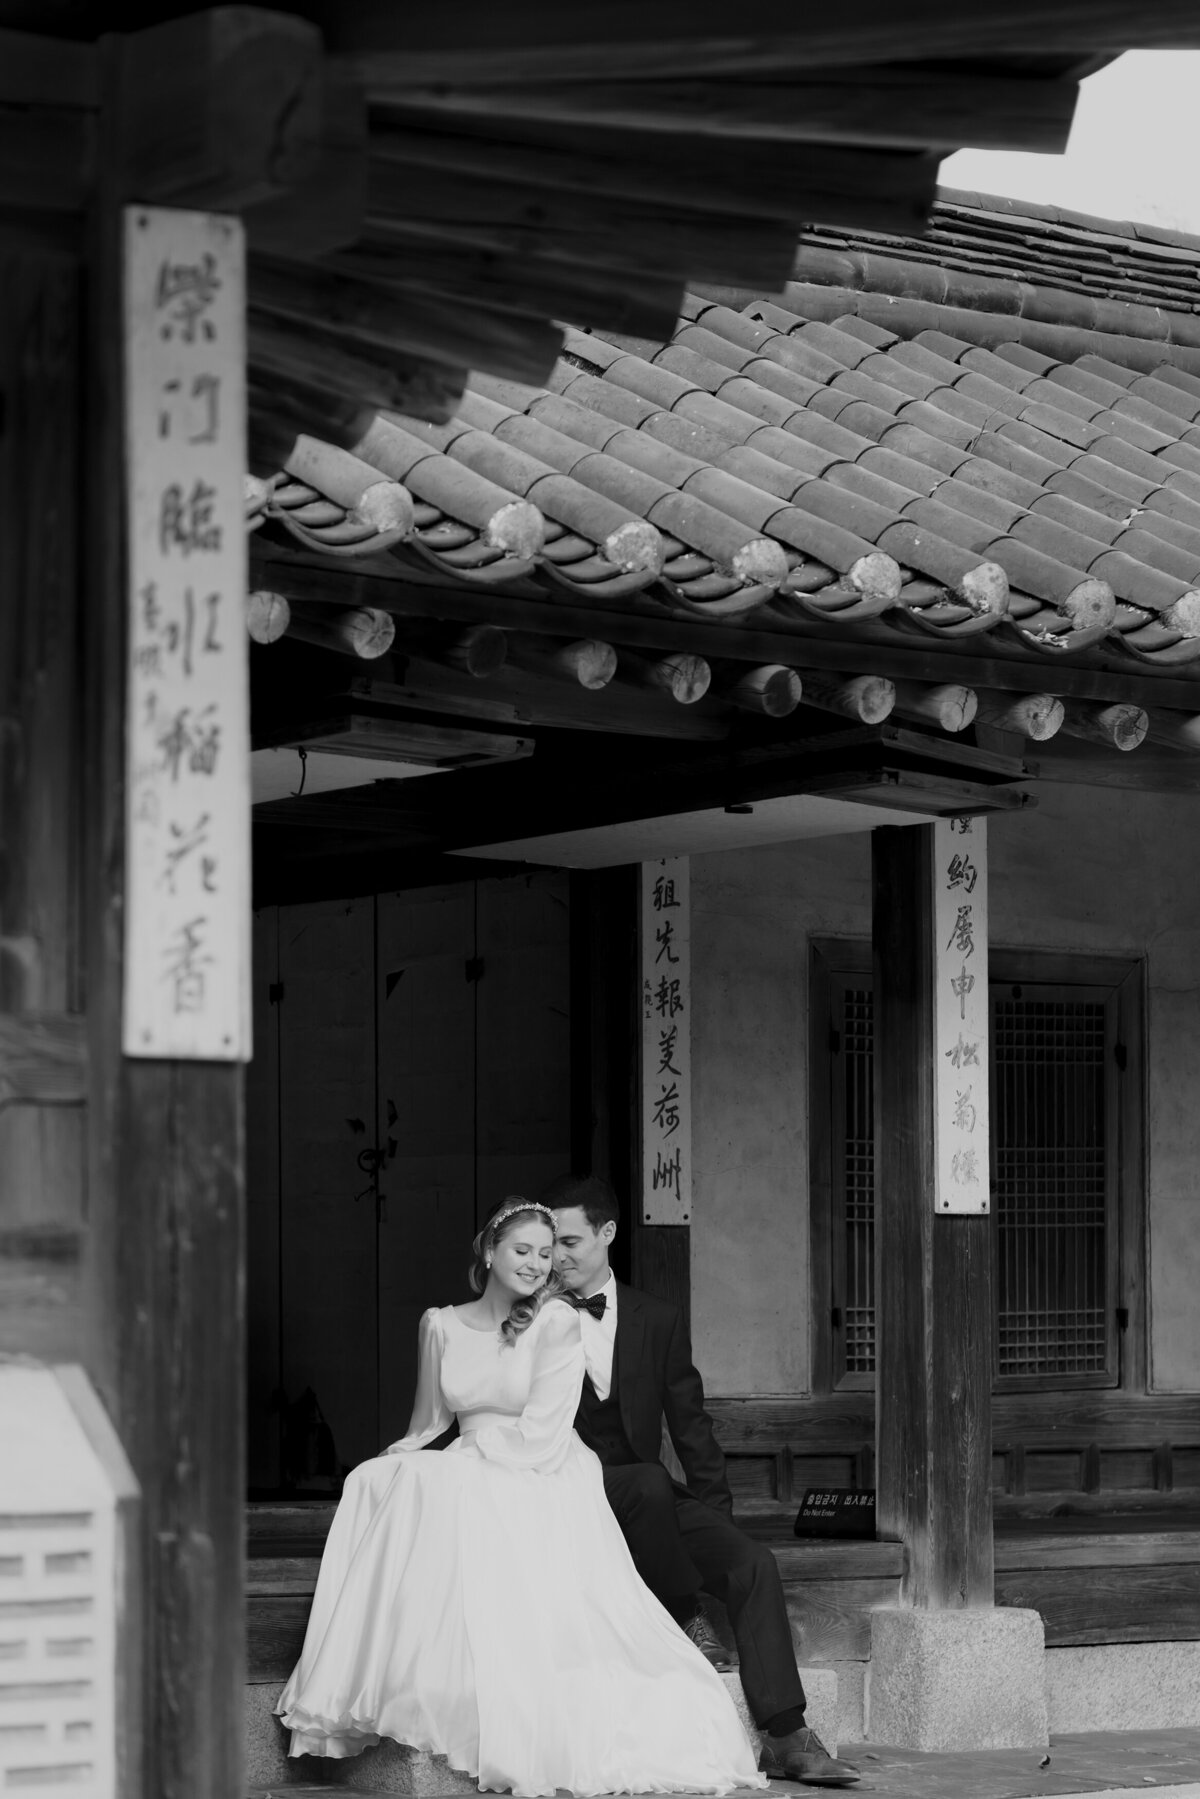 the couple sitting outside wearing their  wedding dress and suit